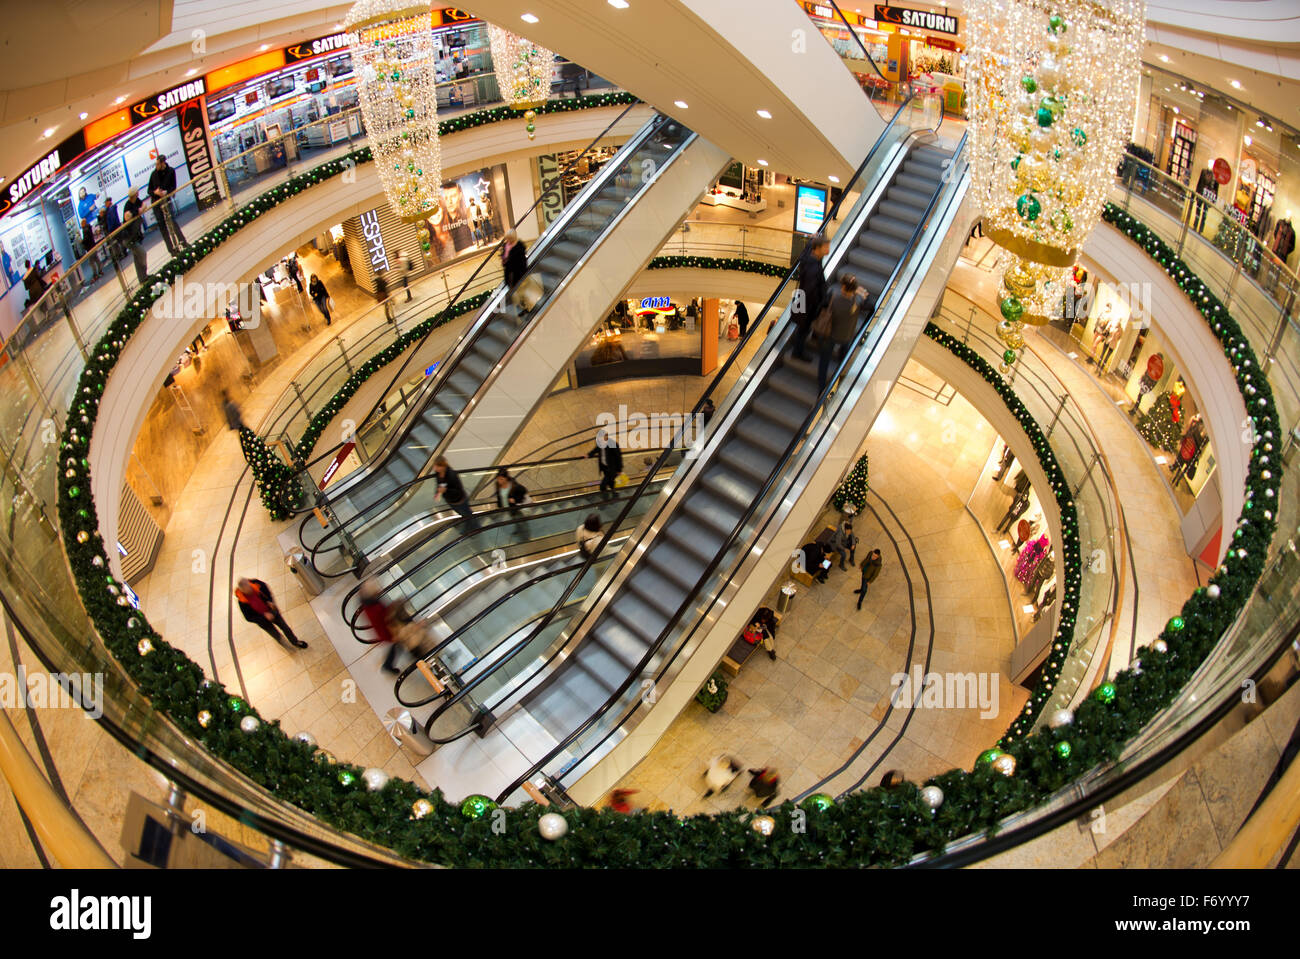 Dresden, Germany. 20th Nov, 2015. Customers at the Altmarkt-Galerie ride the escalators at the shopping center that has been decorated for Christmas in Dresden, Germany, 20 November 2015. Primarily gift cards, books, and jewelry are sold over the counter in the weeks before the holiday. Retailers in the city hope for a holiday rush - and lure shoppers with a Christmas atmosphere. Photo: ARNO BURGI/dpa/Alamy Live News Stock Photo